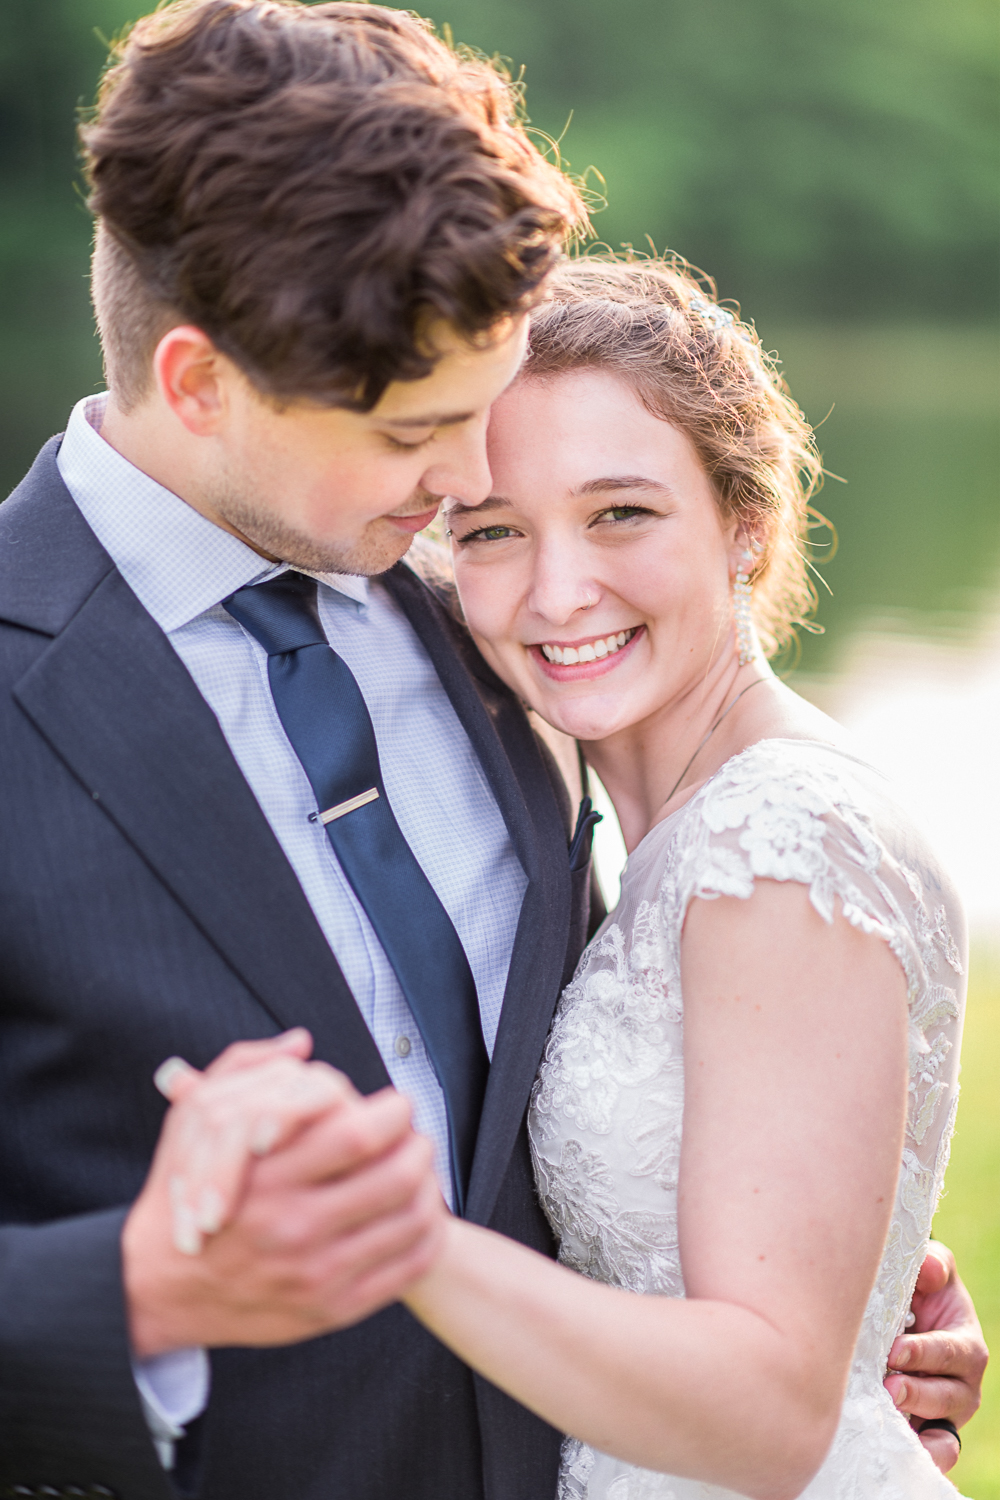 Intimate COVID-19 Elopement at Beaver Creek Reservoir Park in Charlottesville - Hunter and Sarah Photography